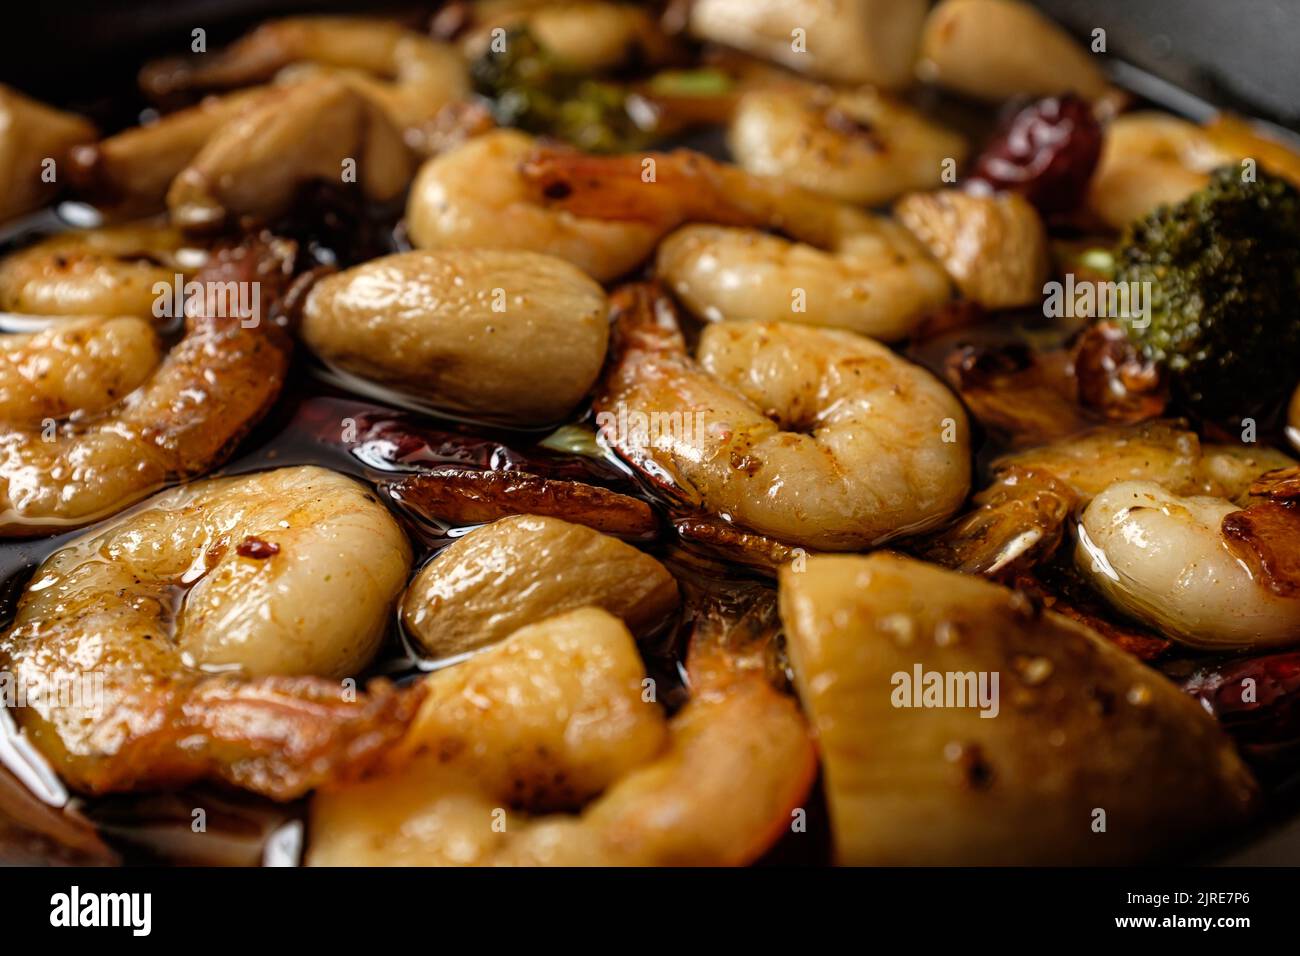 Garlic and peperoncino flavored olive oil. food with shrimp. spanish food culture Stock Photo